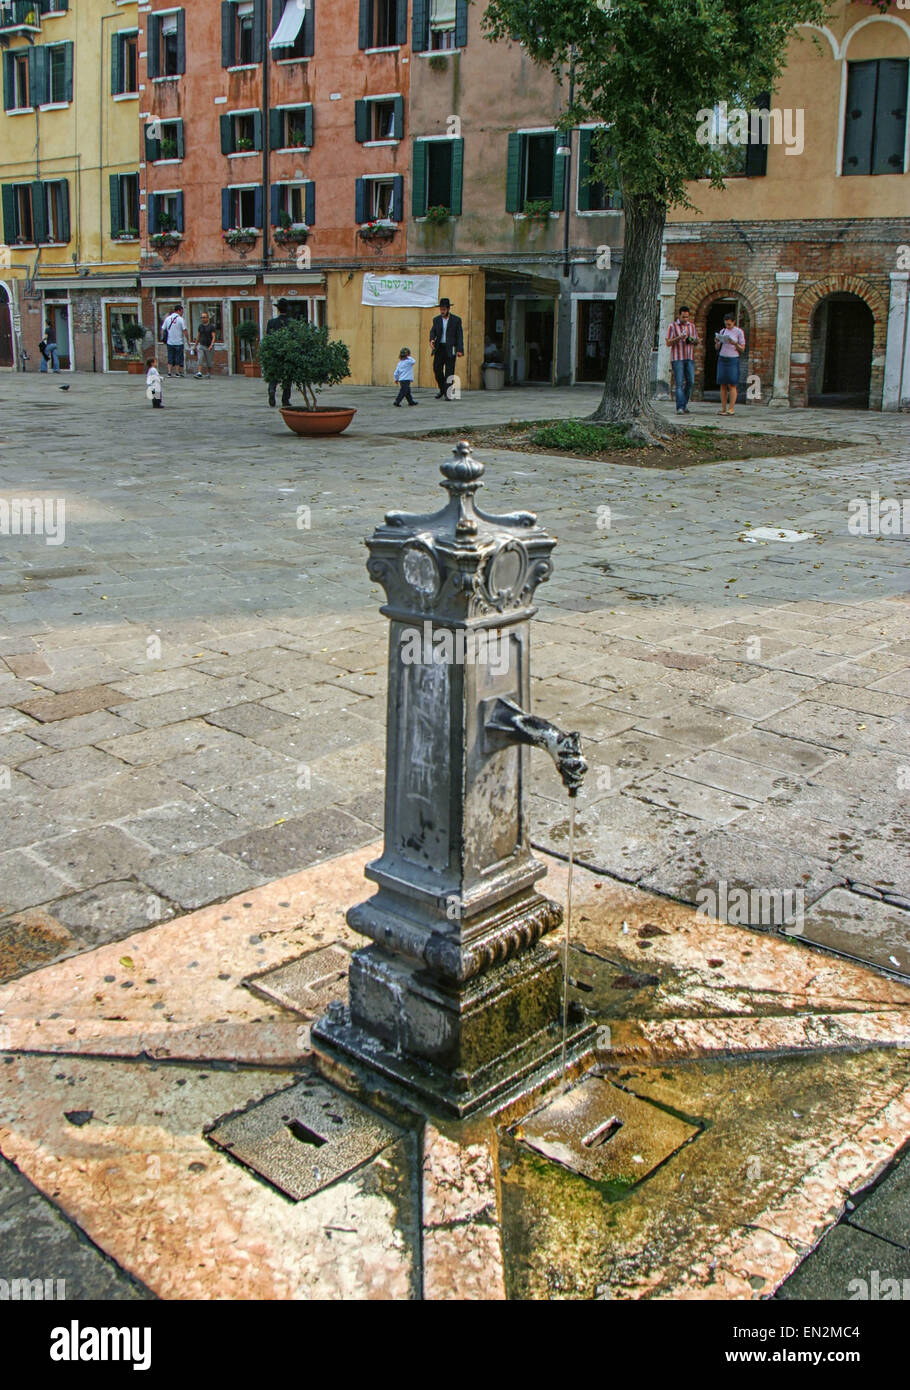 Venice, Province of Venice, ITALY. 7th Oct, 2004. The communal water tap, a historical relic from the past, in the center of the Campo del Nuovo Ghetto in Venice. A UNESCO World Heritage Site, Venice is one of the most popular international tourist destinations © Arnold Drapkin/ZUMA Wire/Alamy Live News Stock Photo